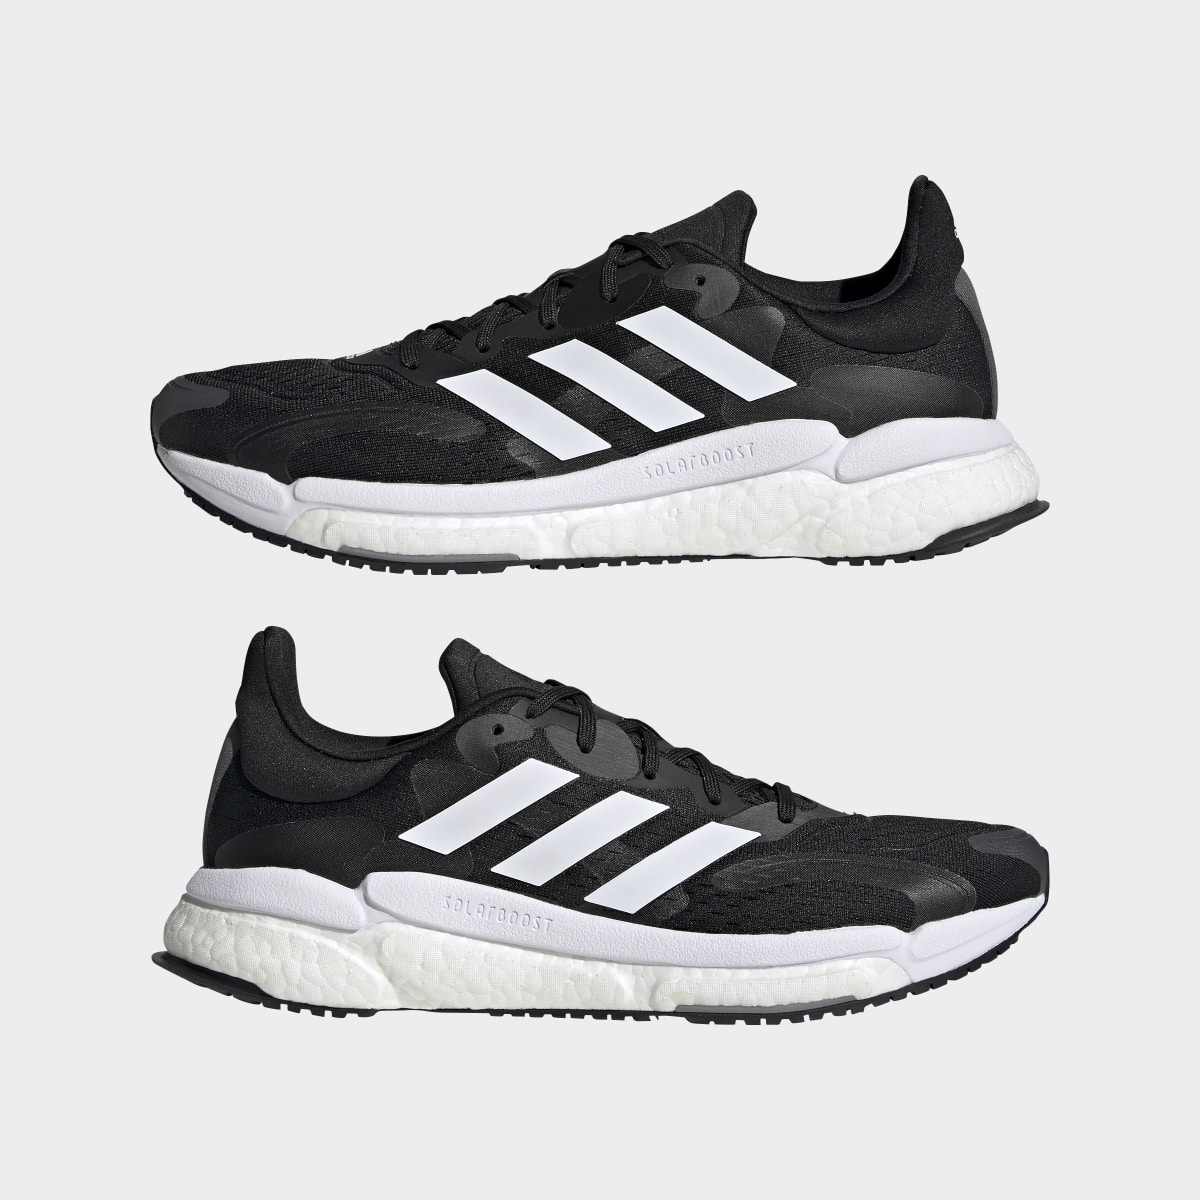 Adidas Chaussure Solarboost 4. 11